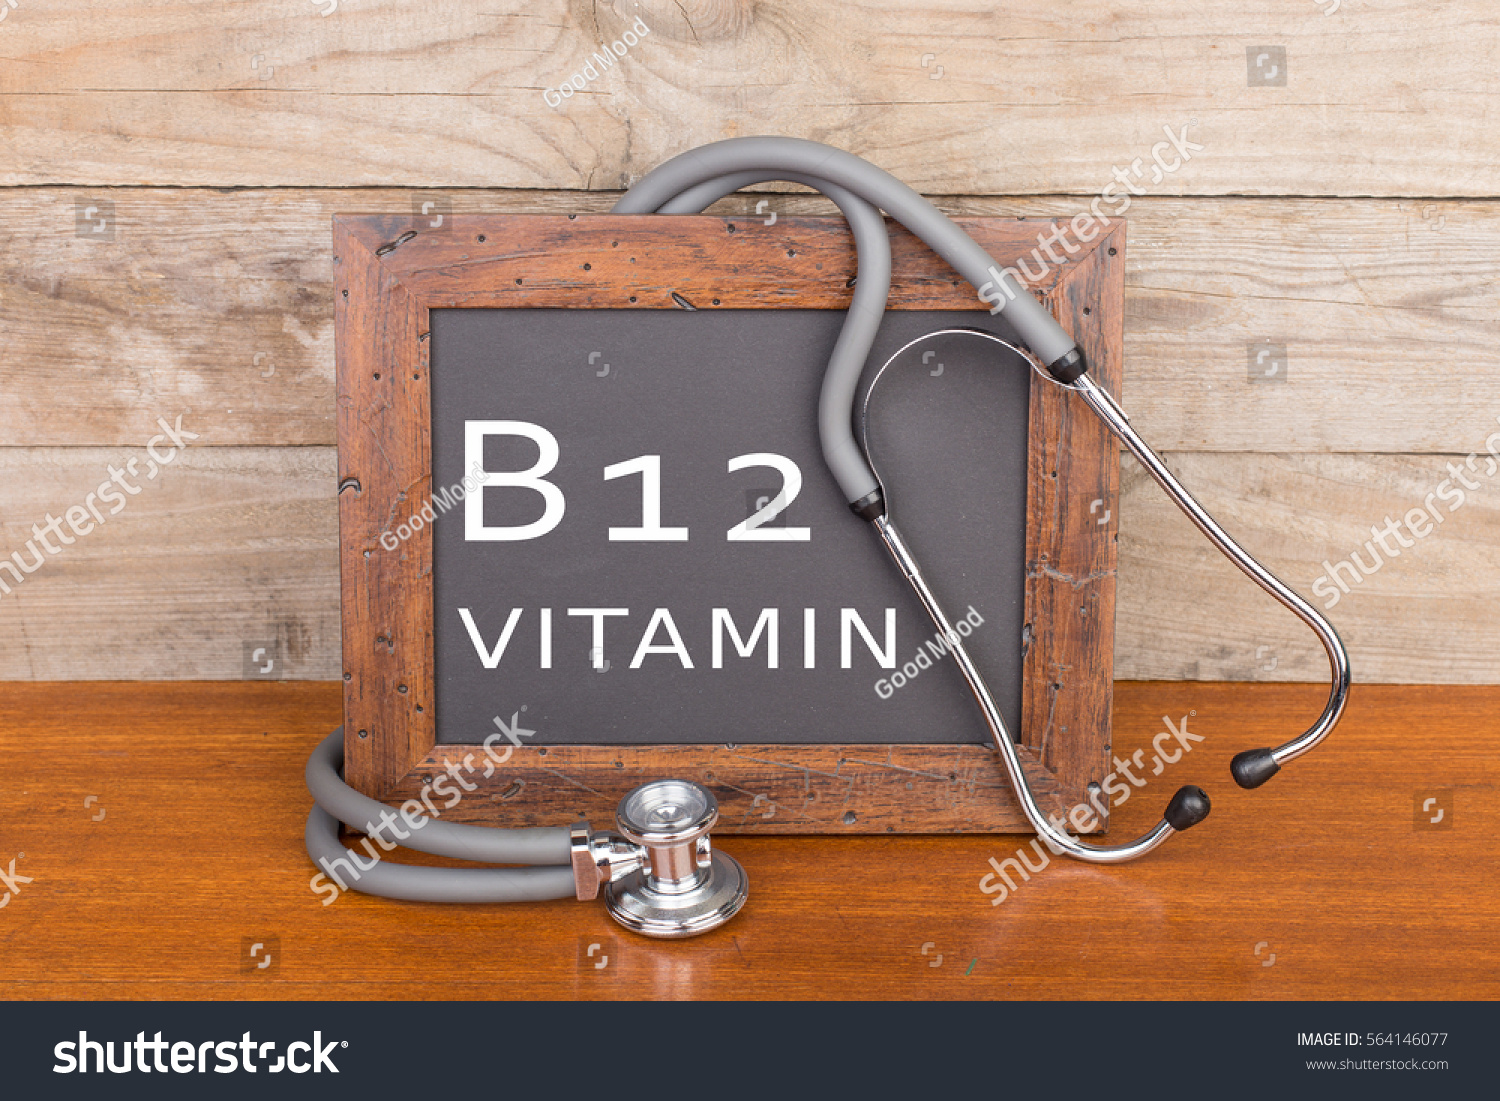 Medical concept - stethoscope and blackboard with text "Vitamin B12" on wooden background #564146077